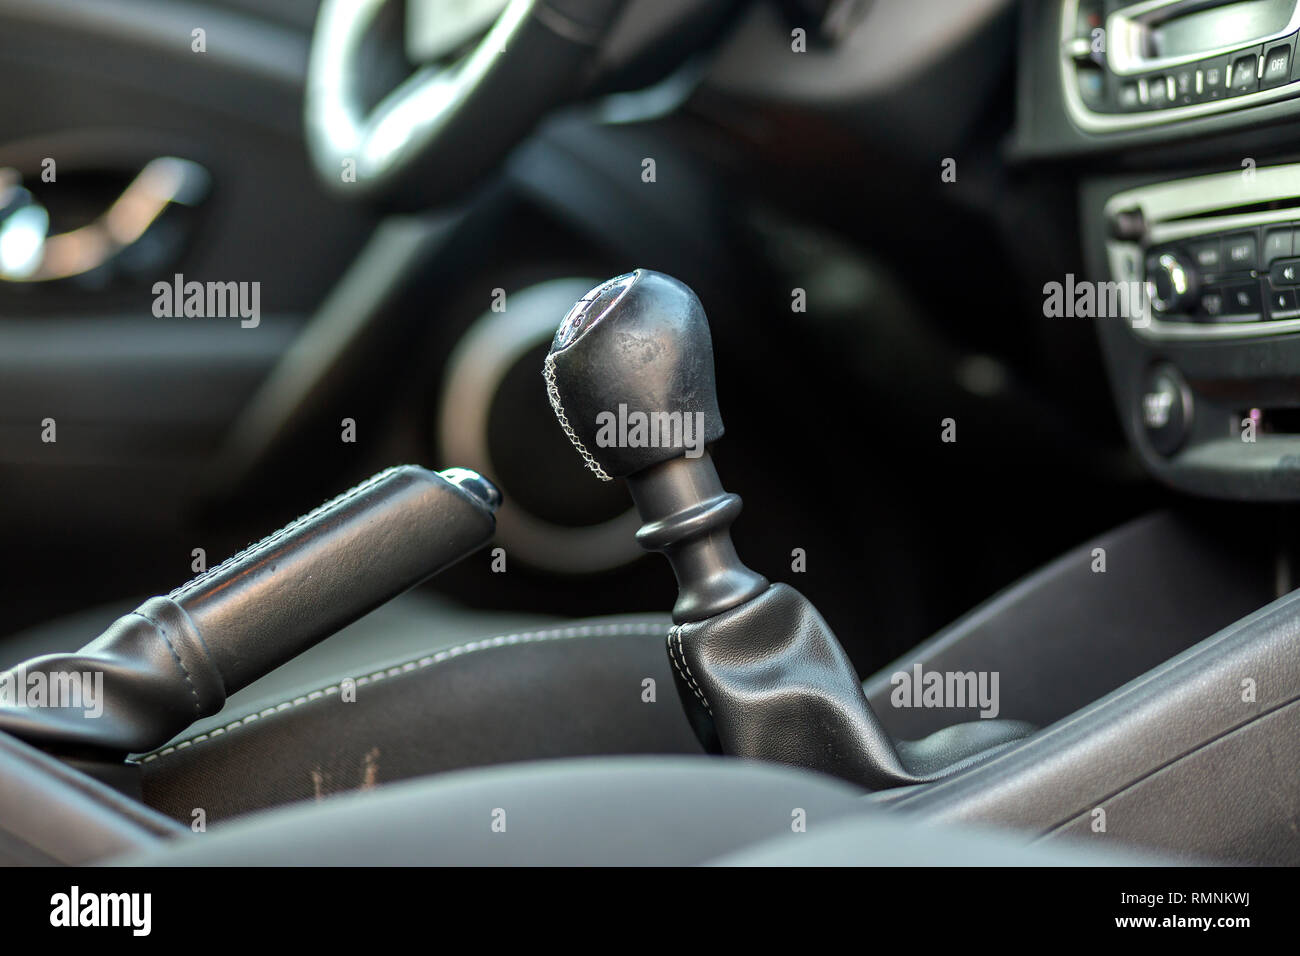 Luxurious Car Black Leather Interior Close Up Detail Of Handbrake Manual Brake And Gearshift Stick On Blurred Dashboard Background Transportation D Stock Photo Alamy